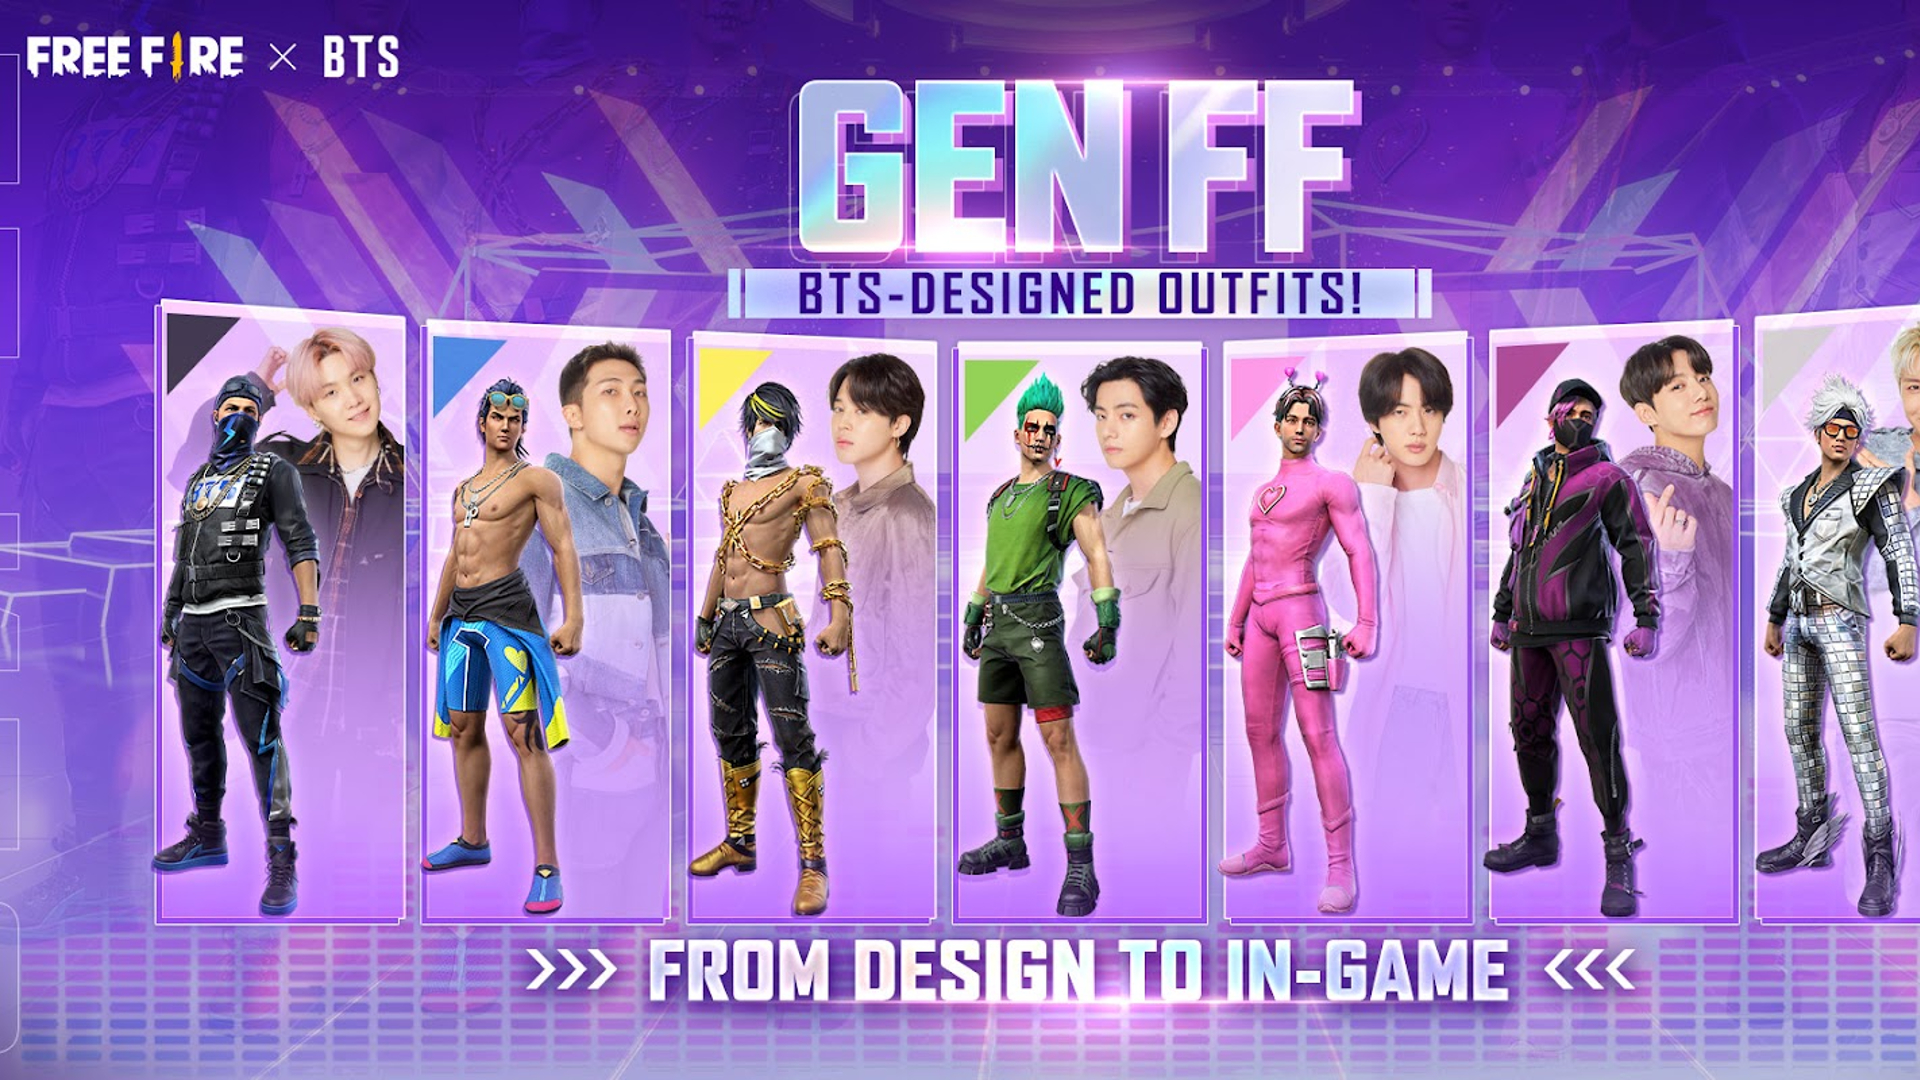 Free fire gets skins designed by bts members